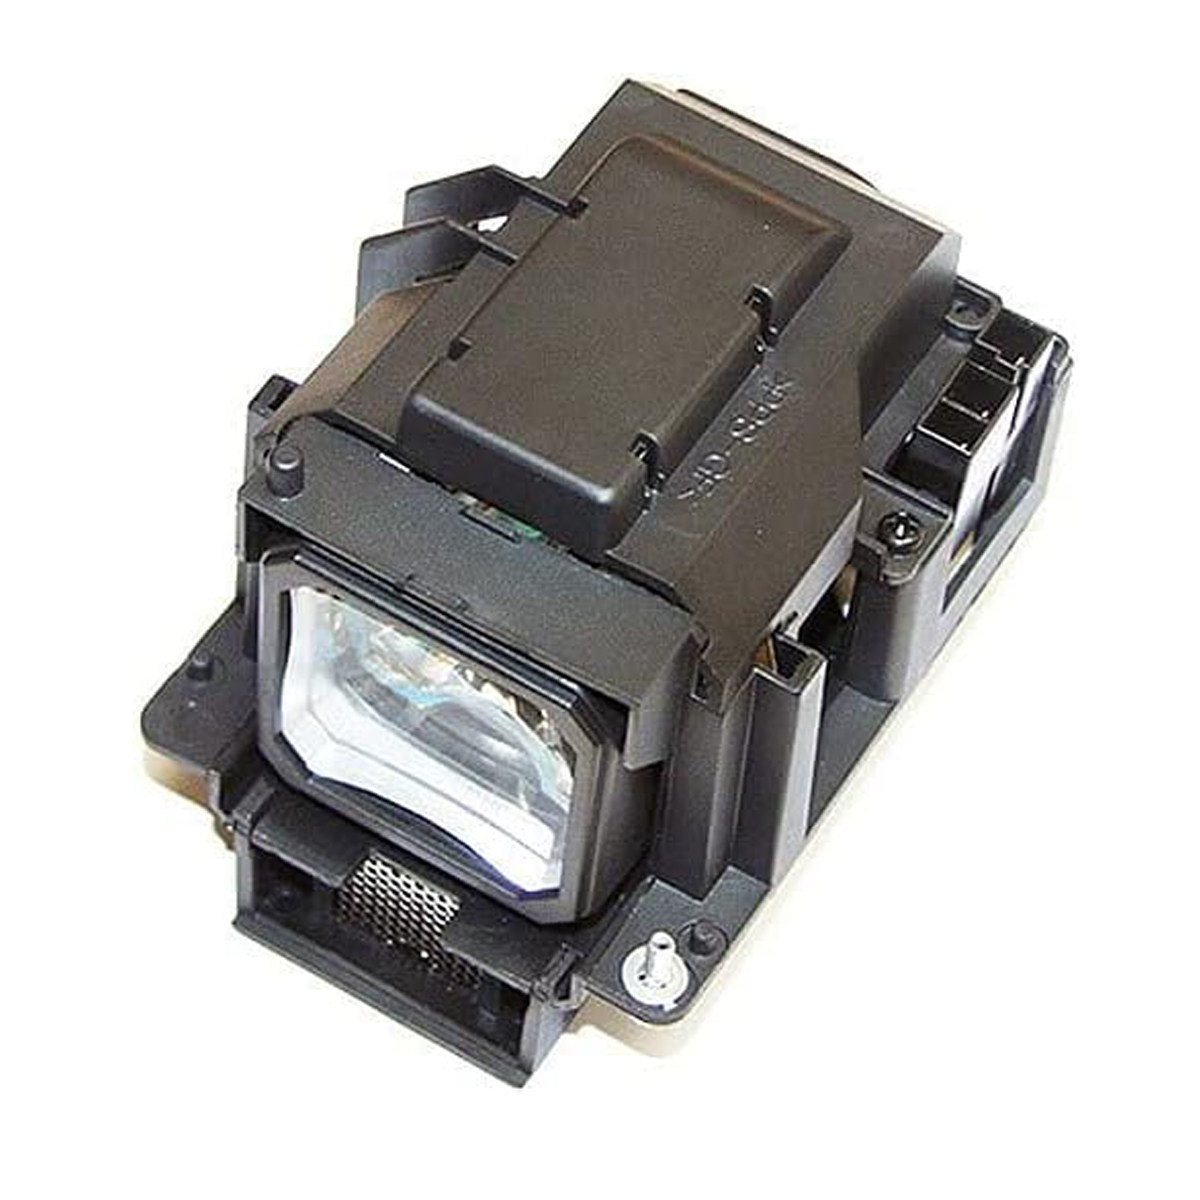 Replacement Projector lamp 456-8769 For Dukane Projector